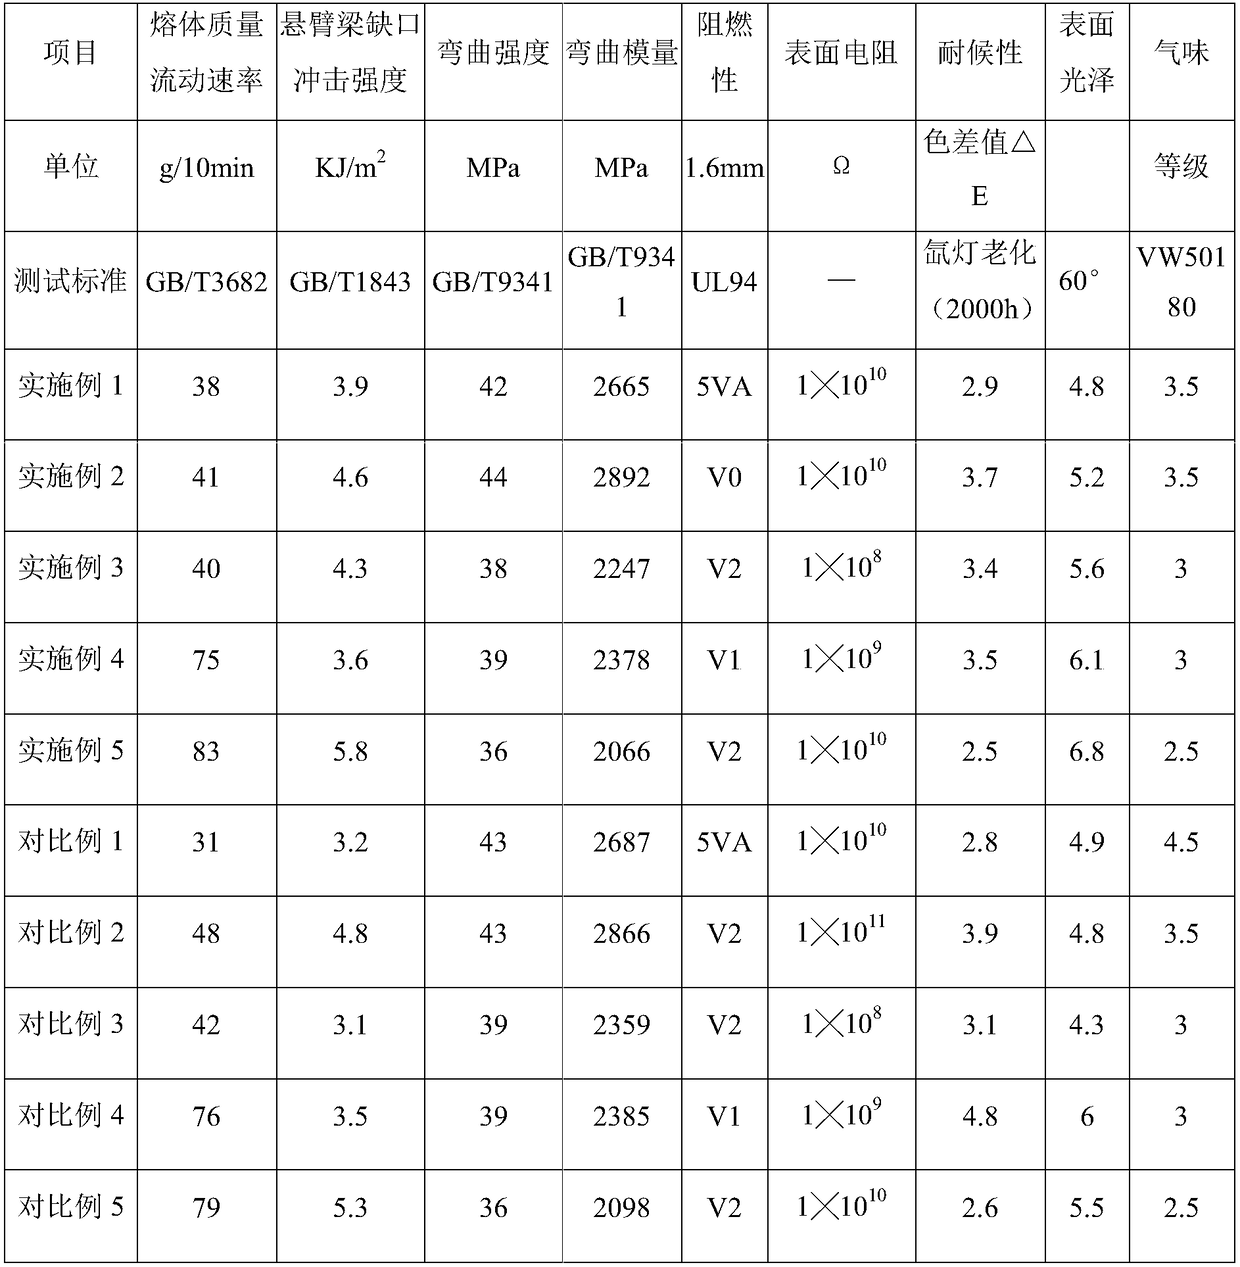 Highly weather-resistant permanent antistatic flame-retardant polypropylene material as well as preparation method and application thereof